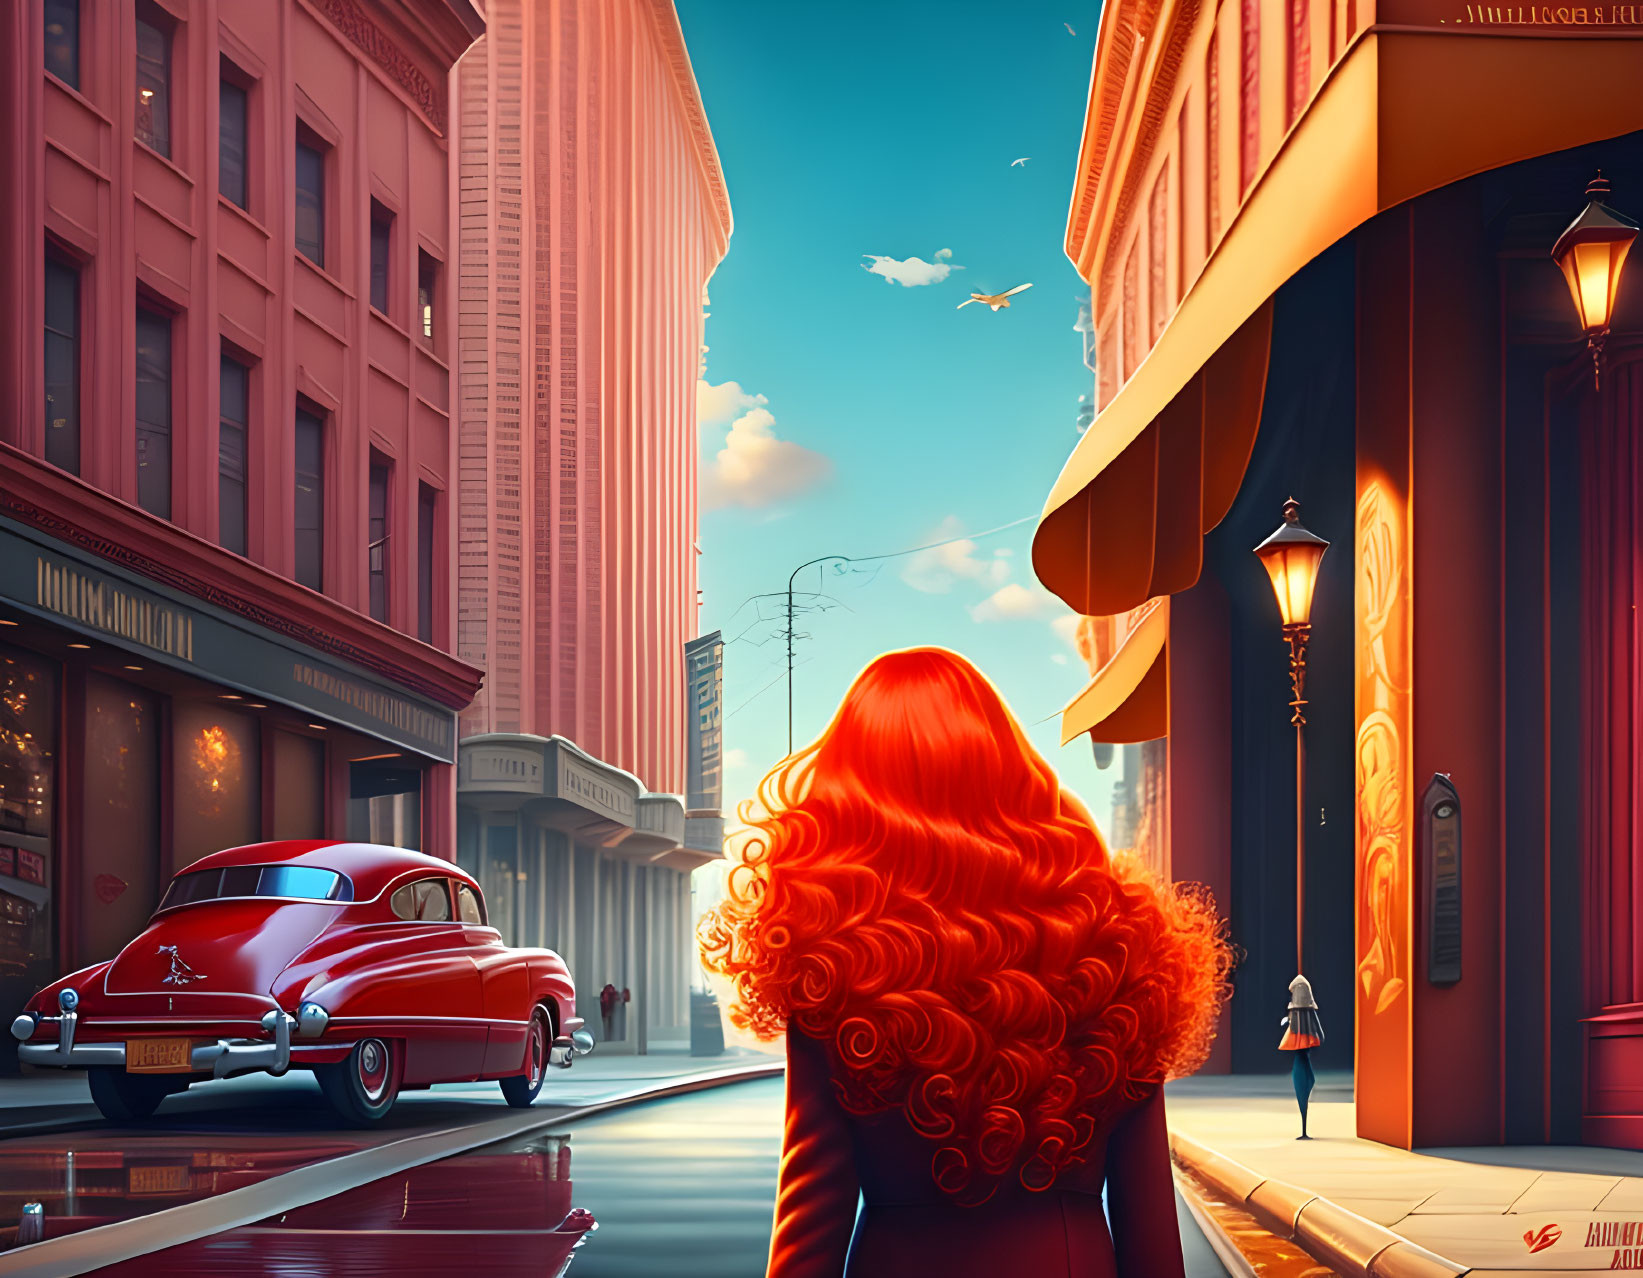 Vibrant red-haired woman on urban street with classic car and cityscape.